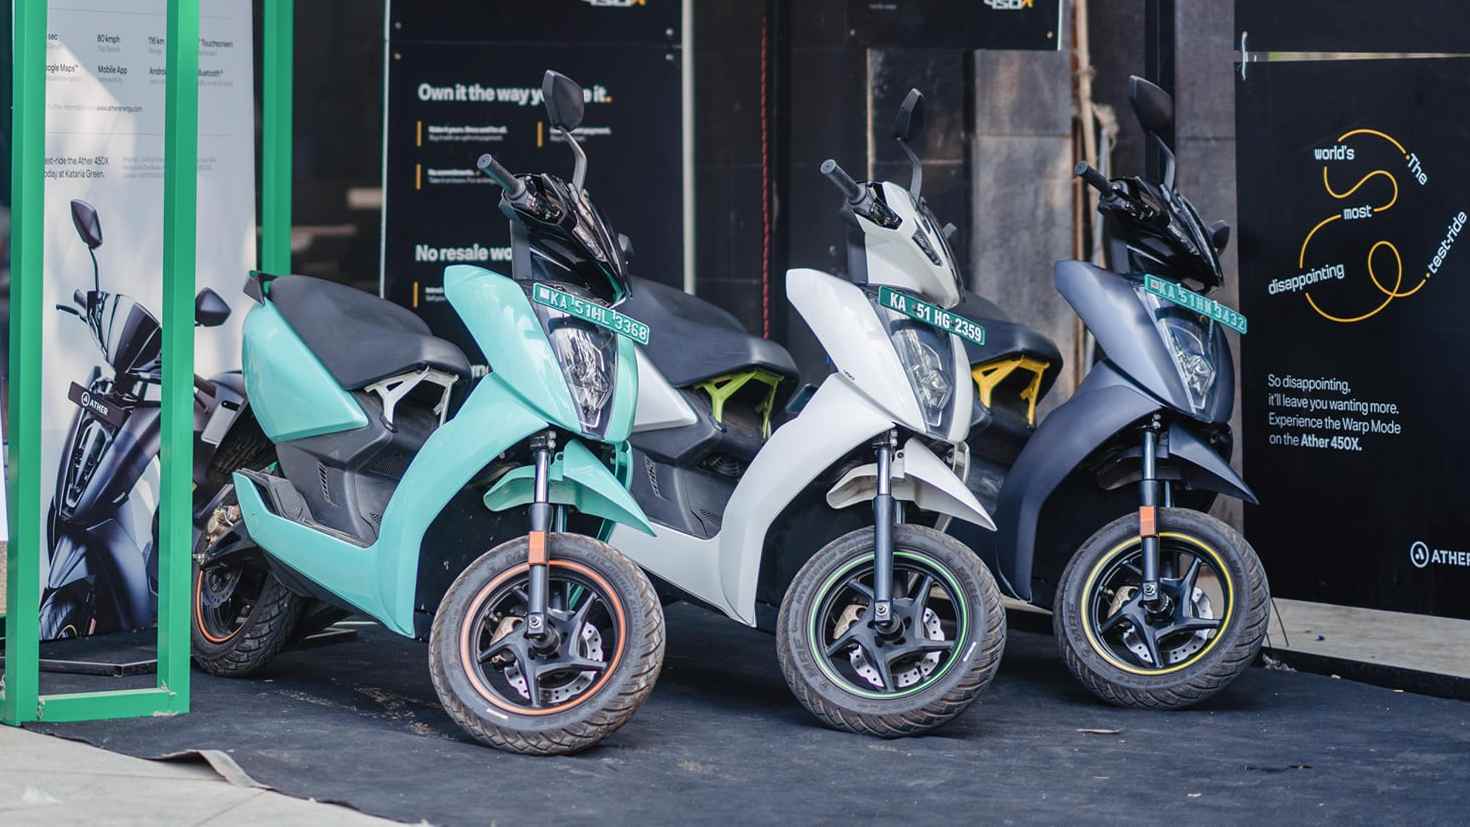 Women now account for 25 percent of all Ather Energy scooter buyers. Image: Ather Energy